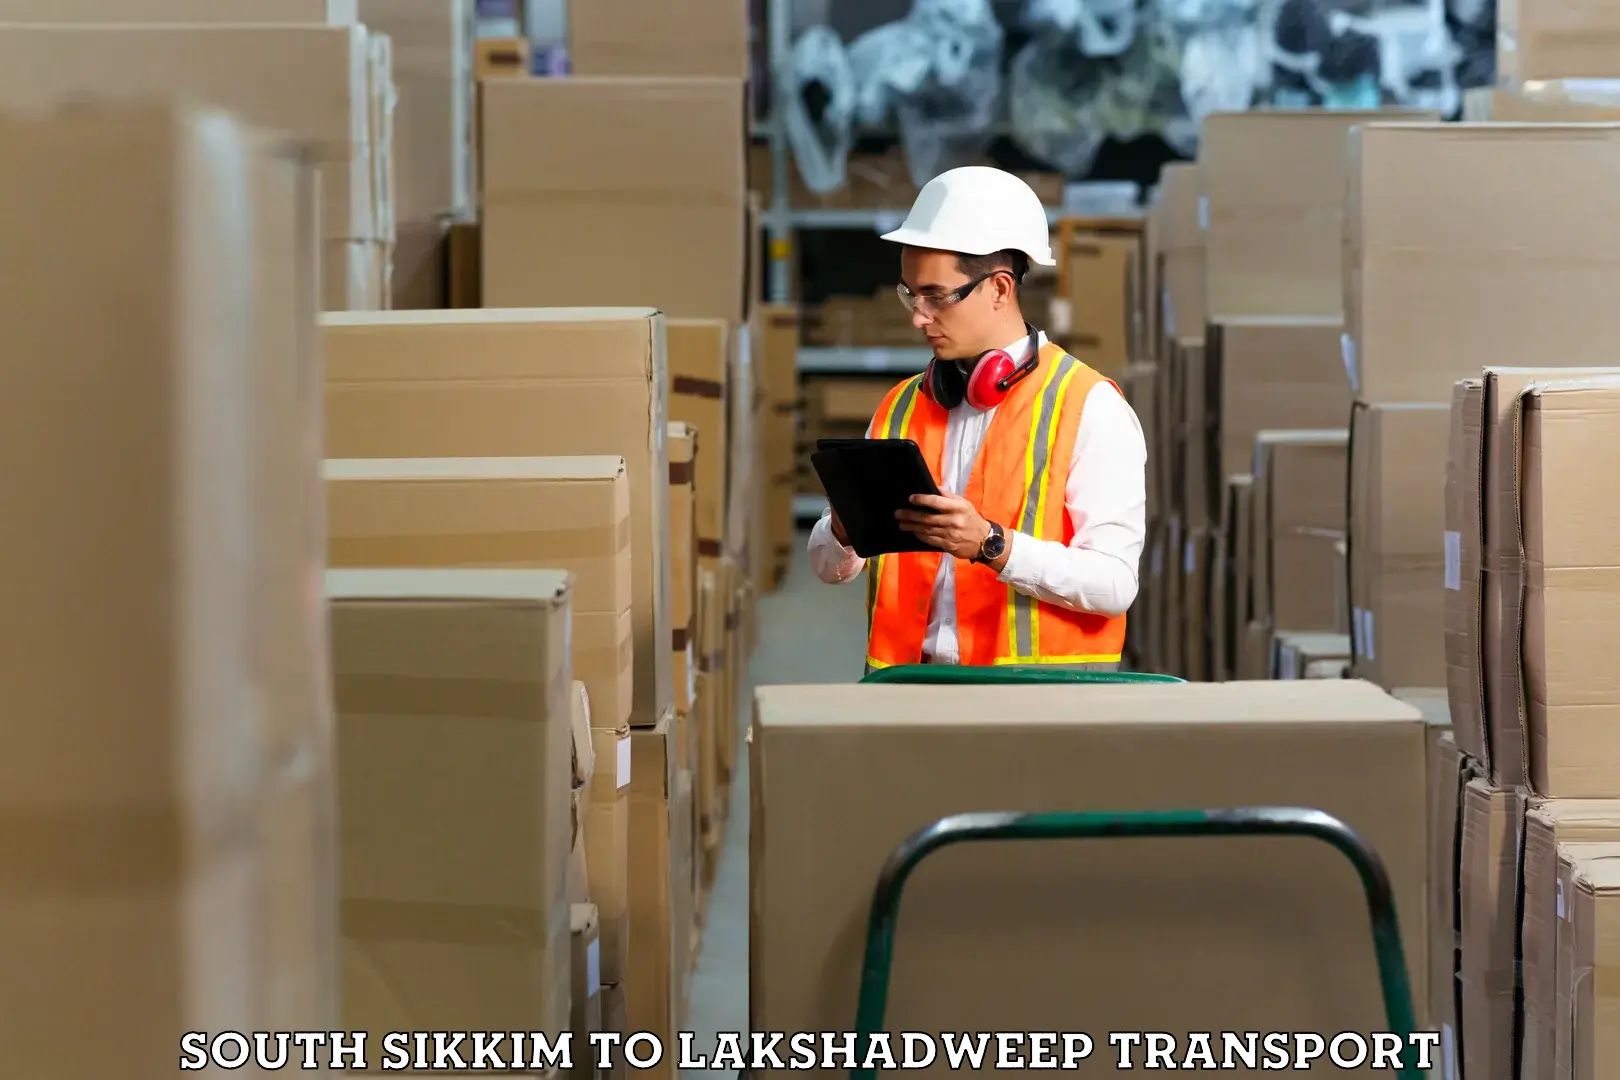 Daily parcel service transport South Sikkim to Lakshadweep